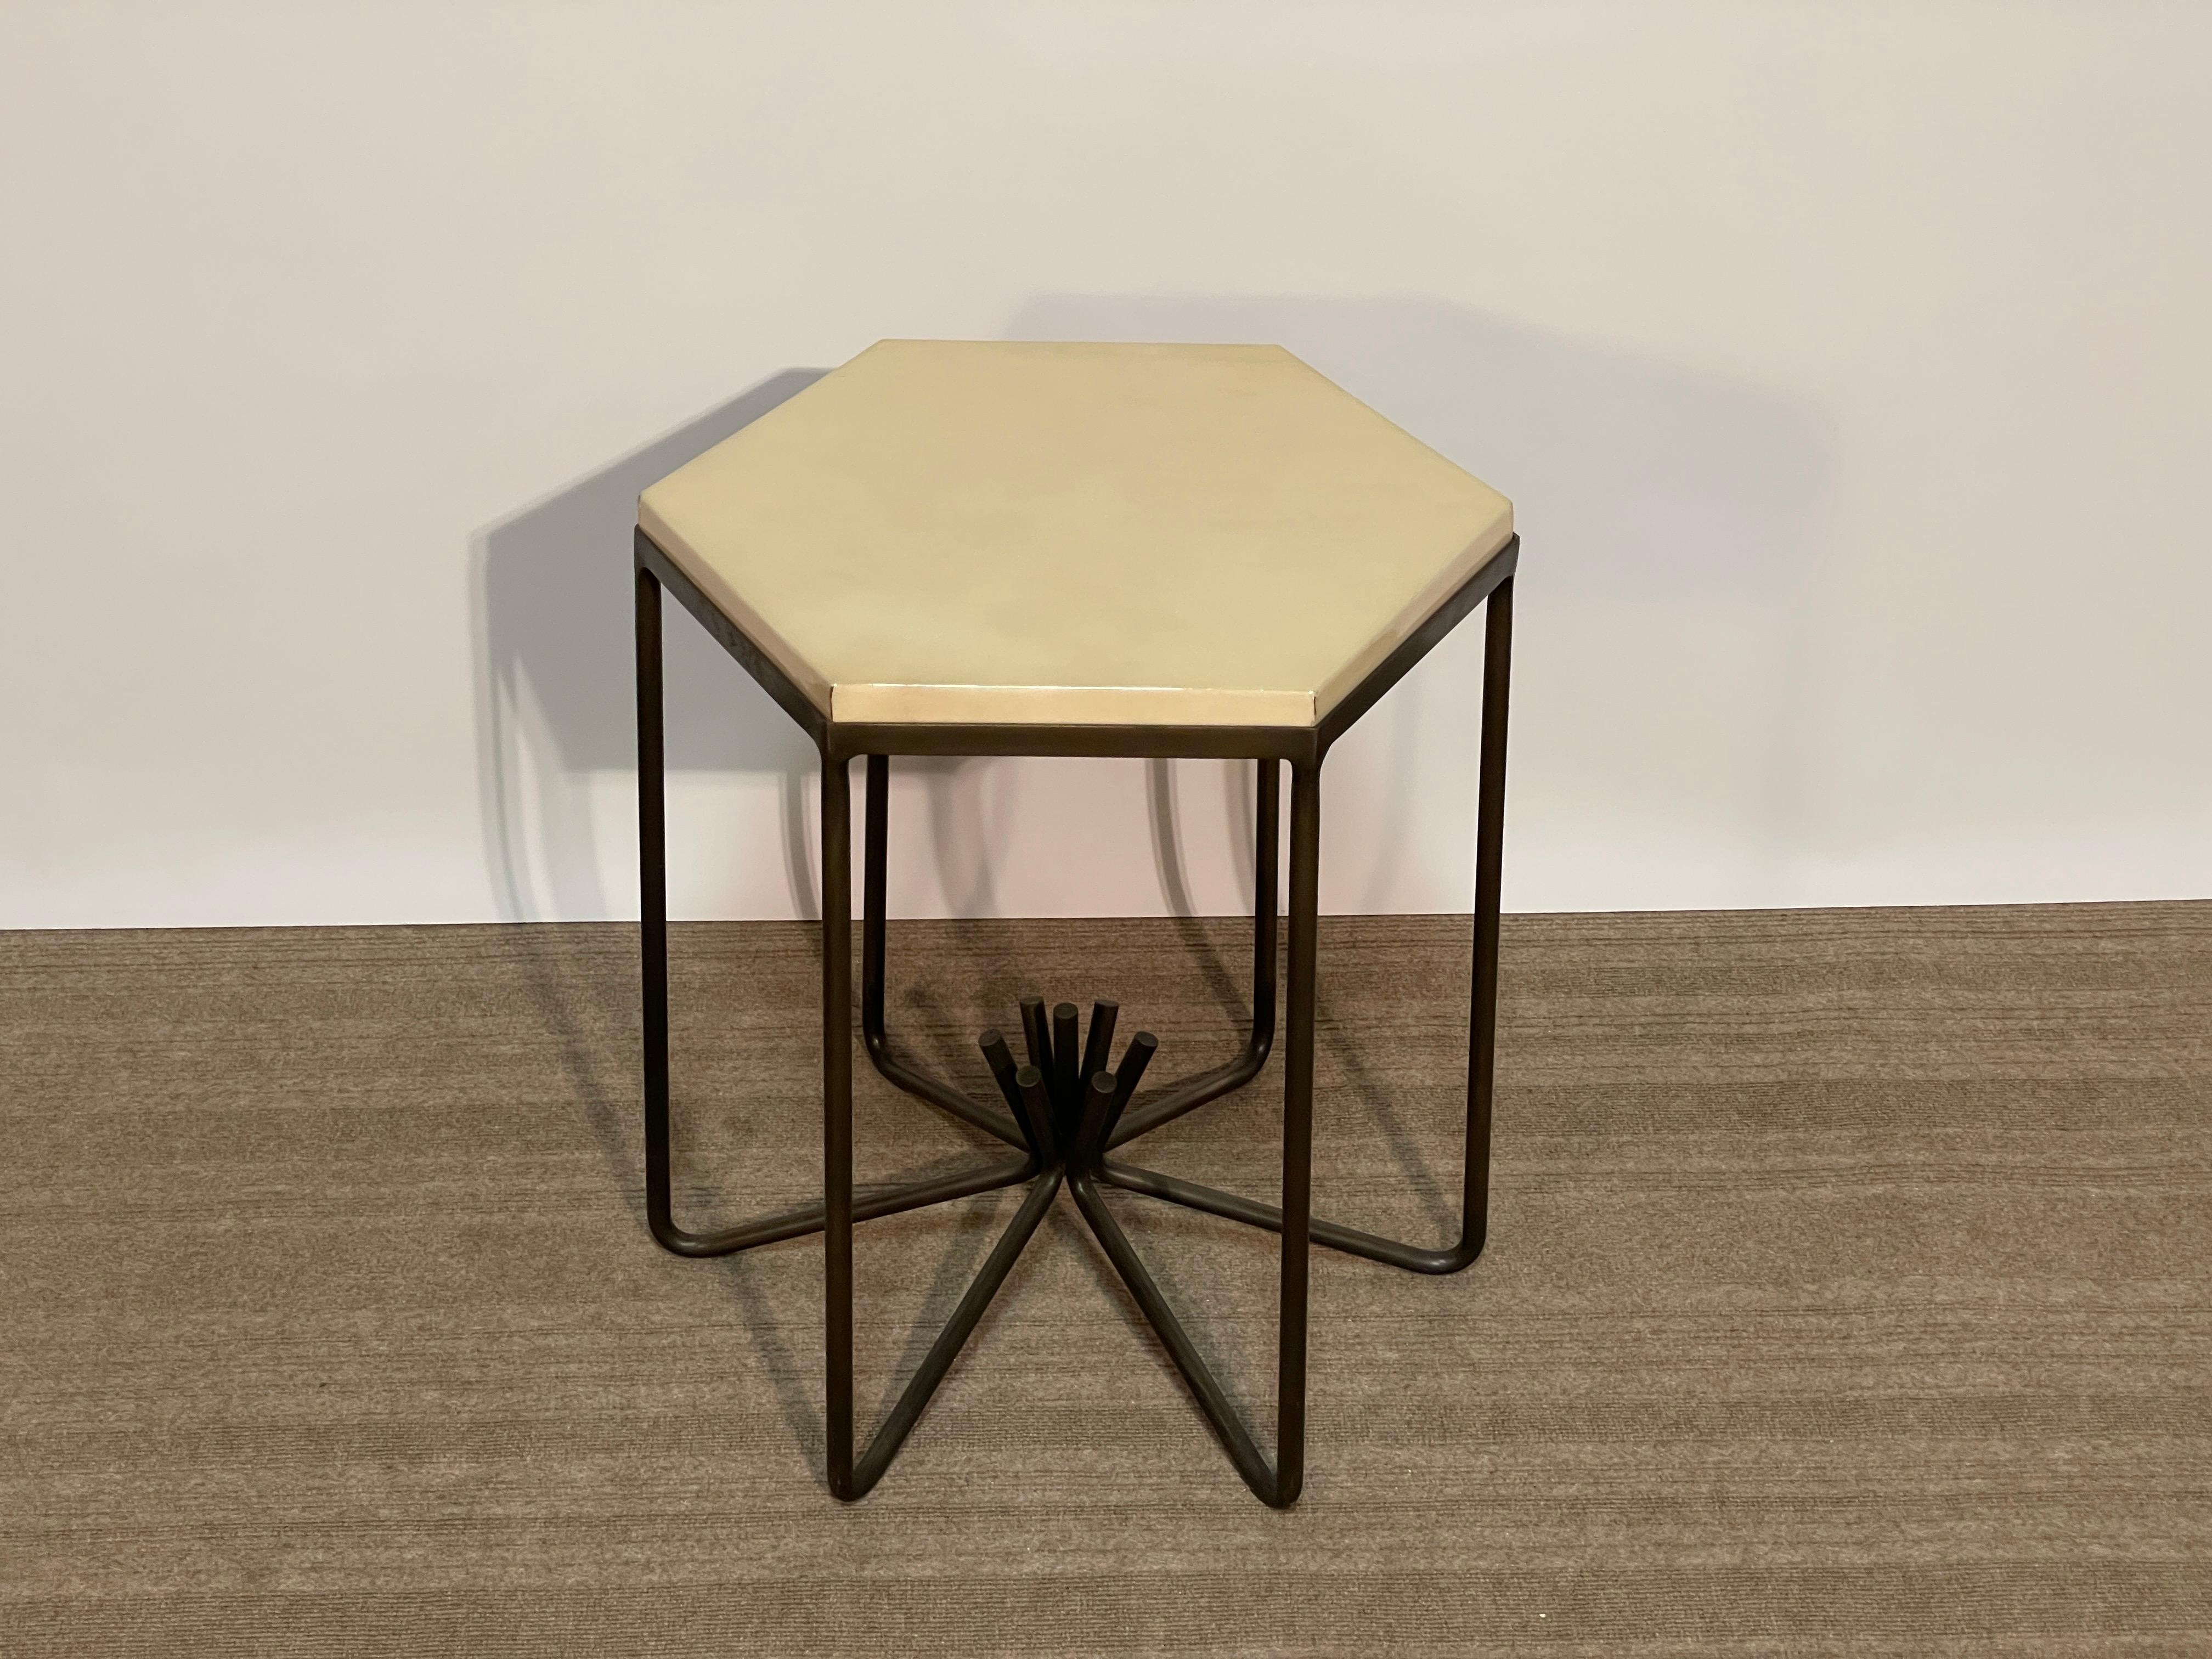 The Eileen side table by Jean de Merry is a timeless design of bent bronze shafts that collect in the center, turned up to form the sturdy base finished in antiqued bronze.  The wooden top is covered in natural parchment with a lacquer finish